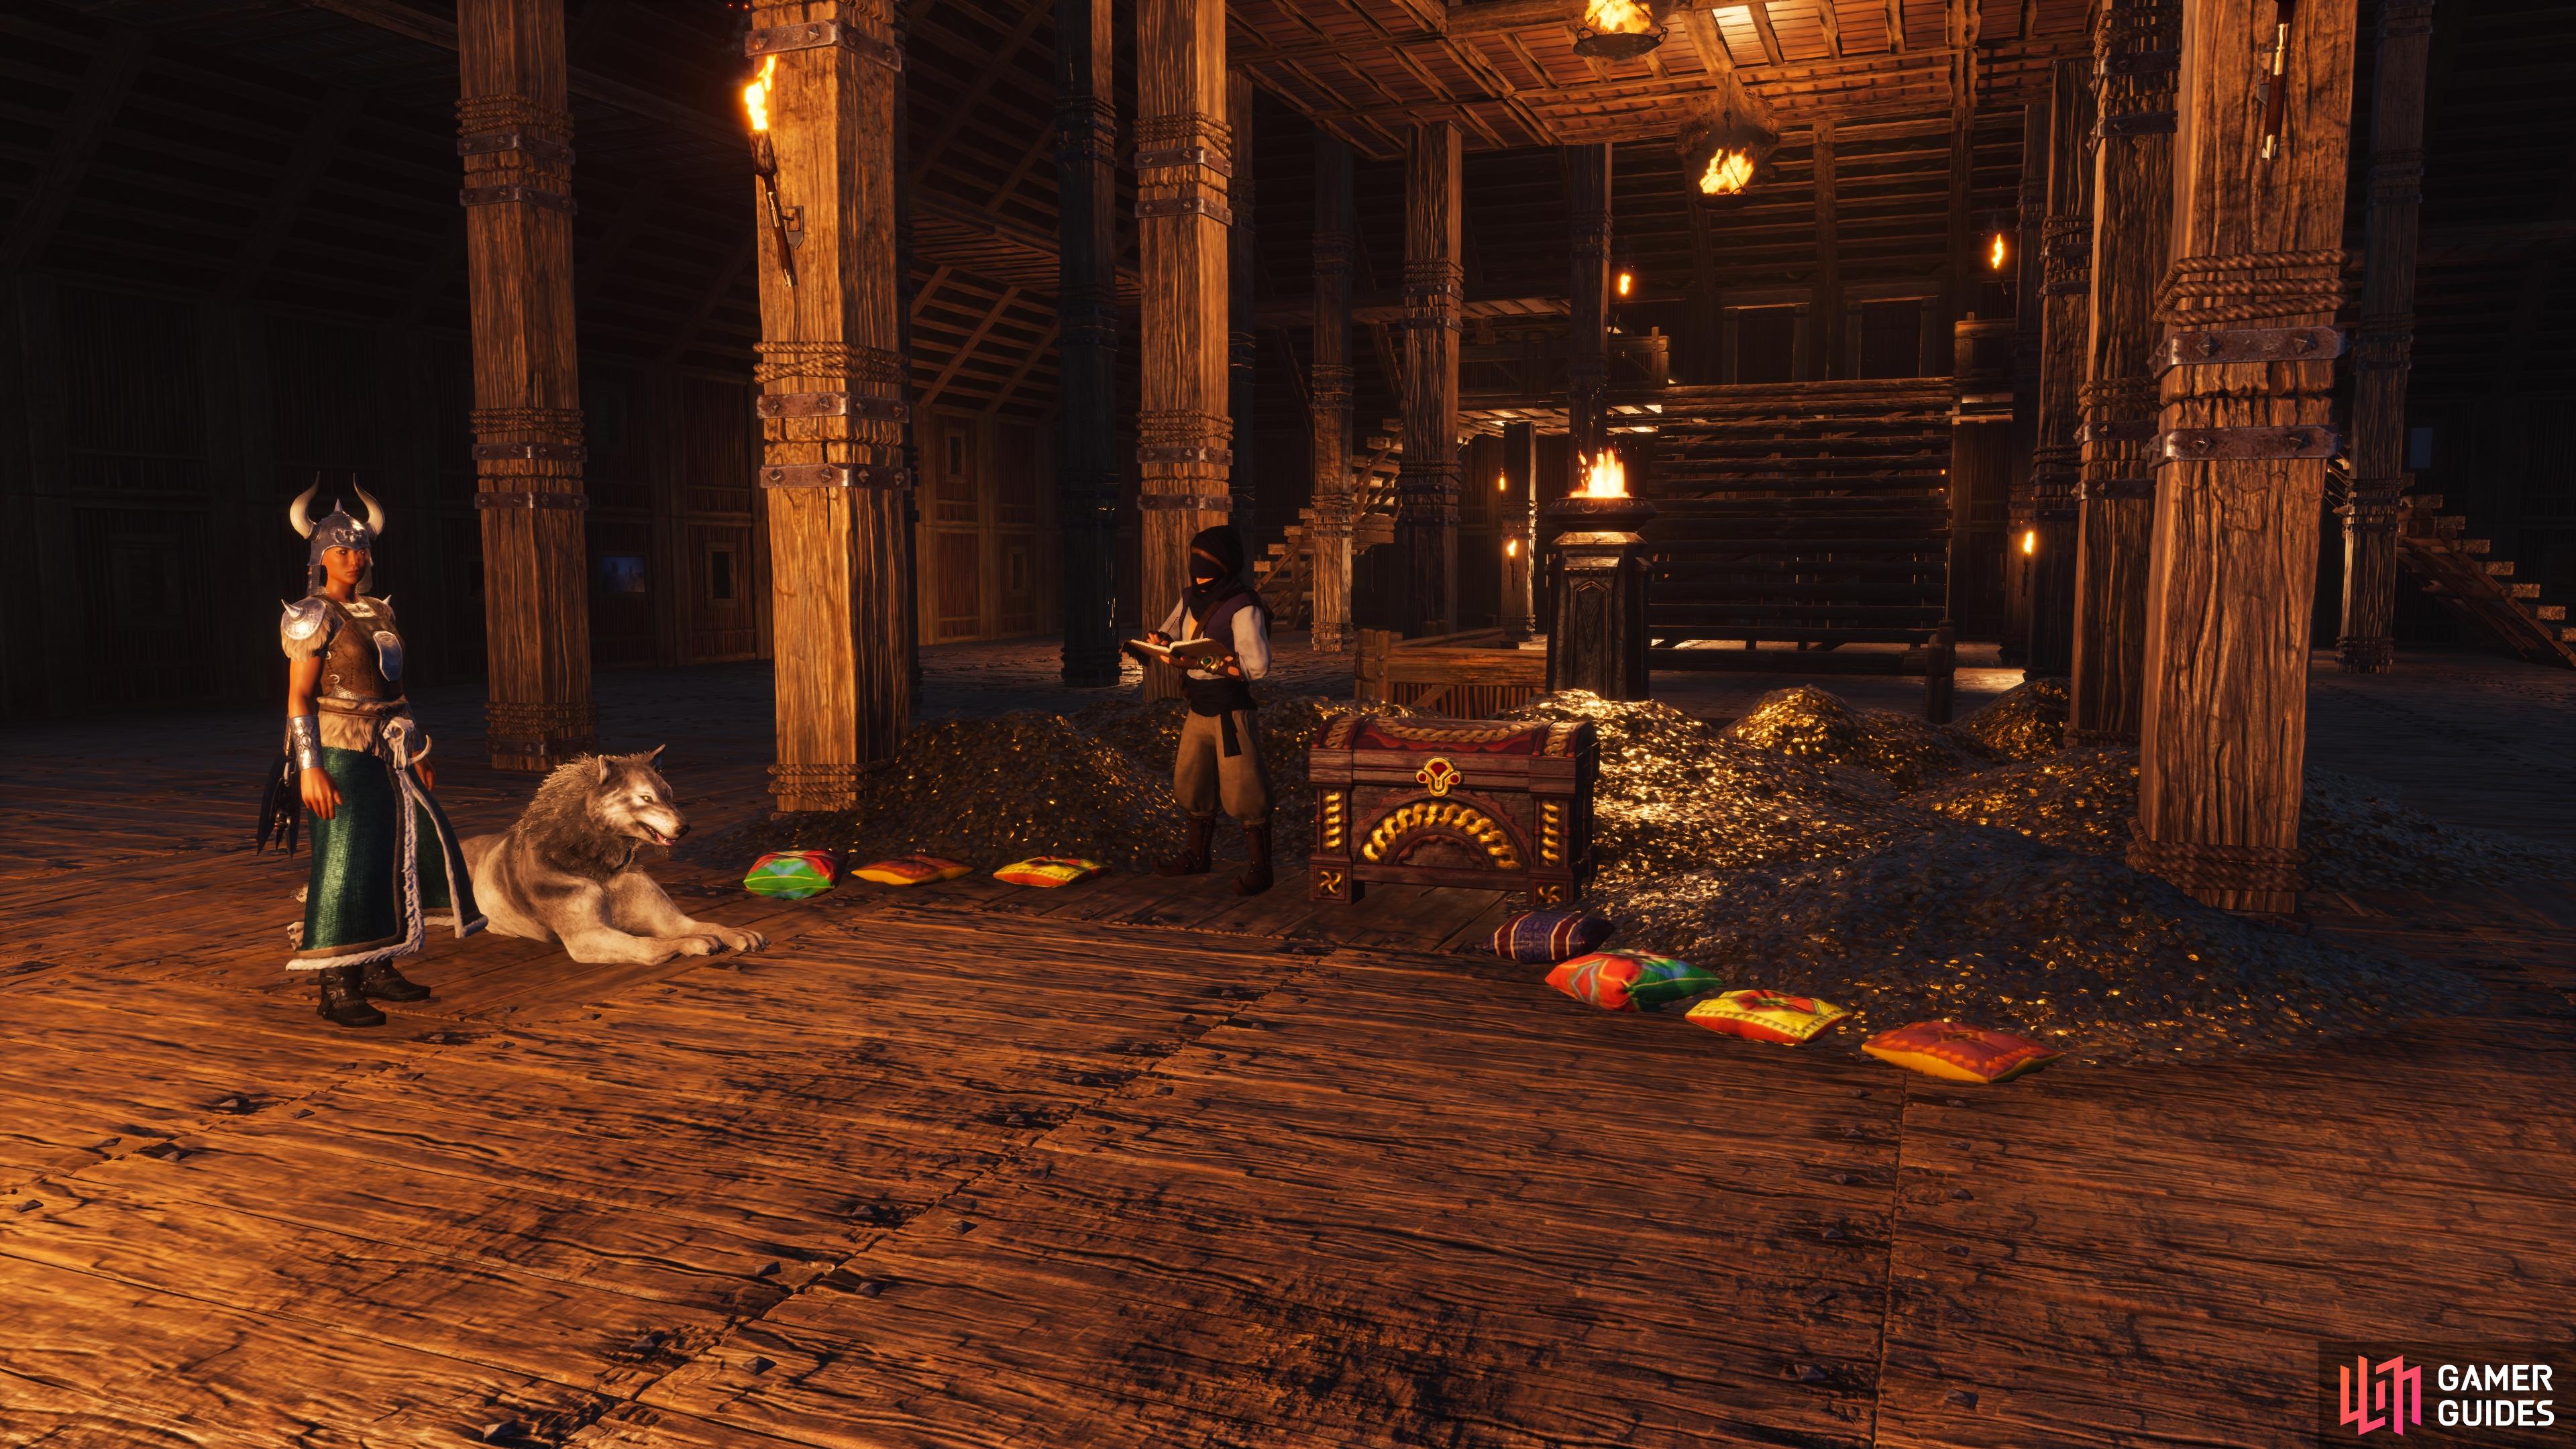 The humble beginnings of a treasure coffer in Conan Exiles.